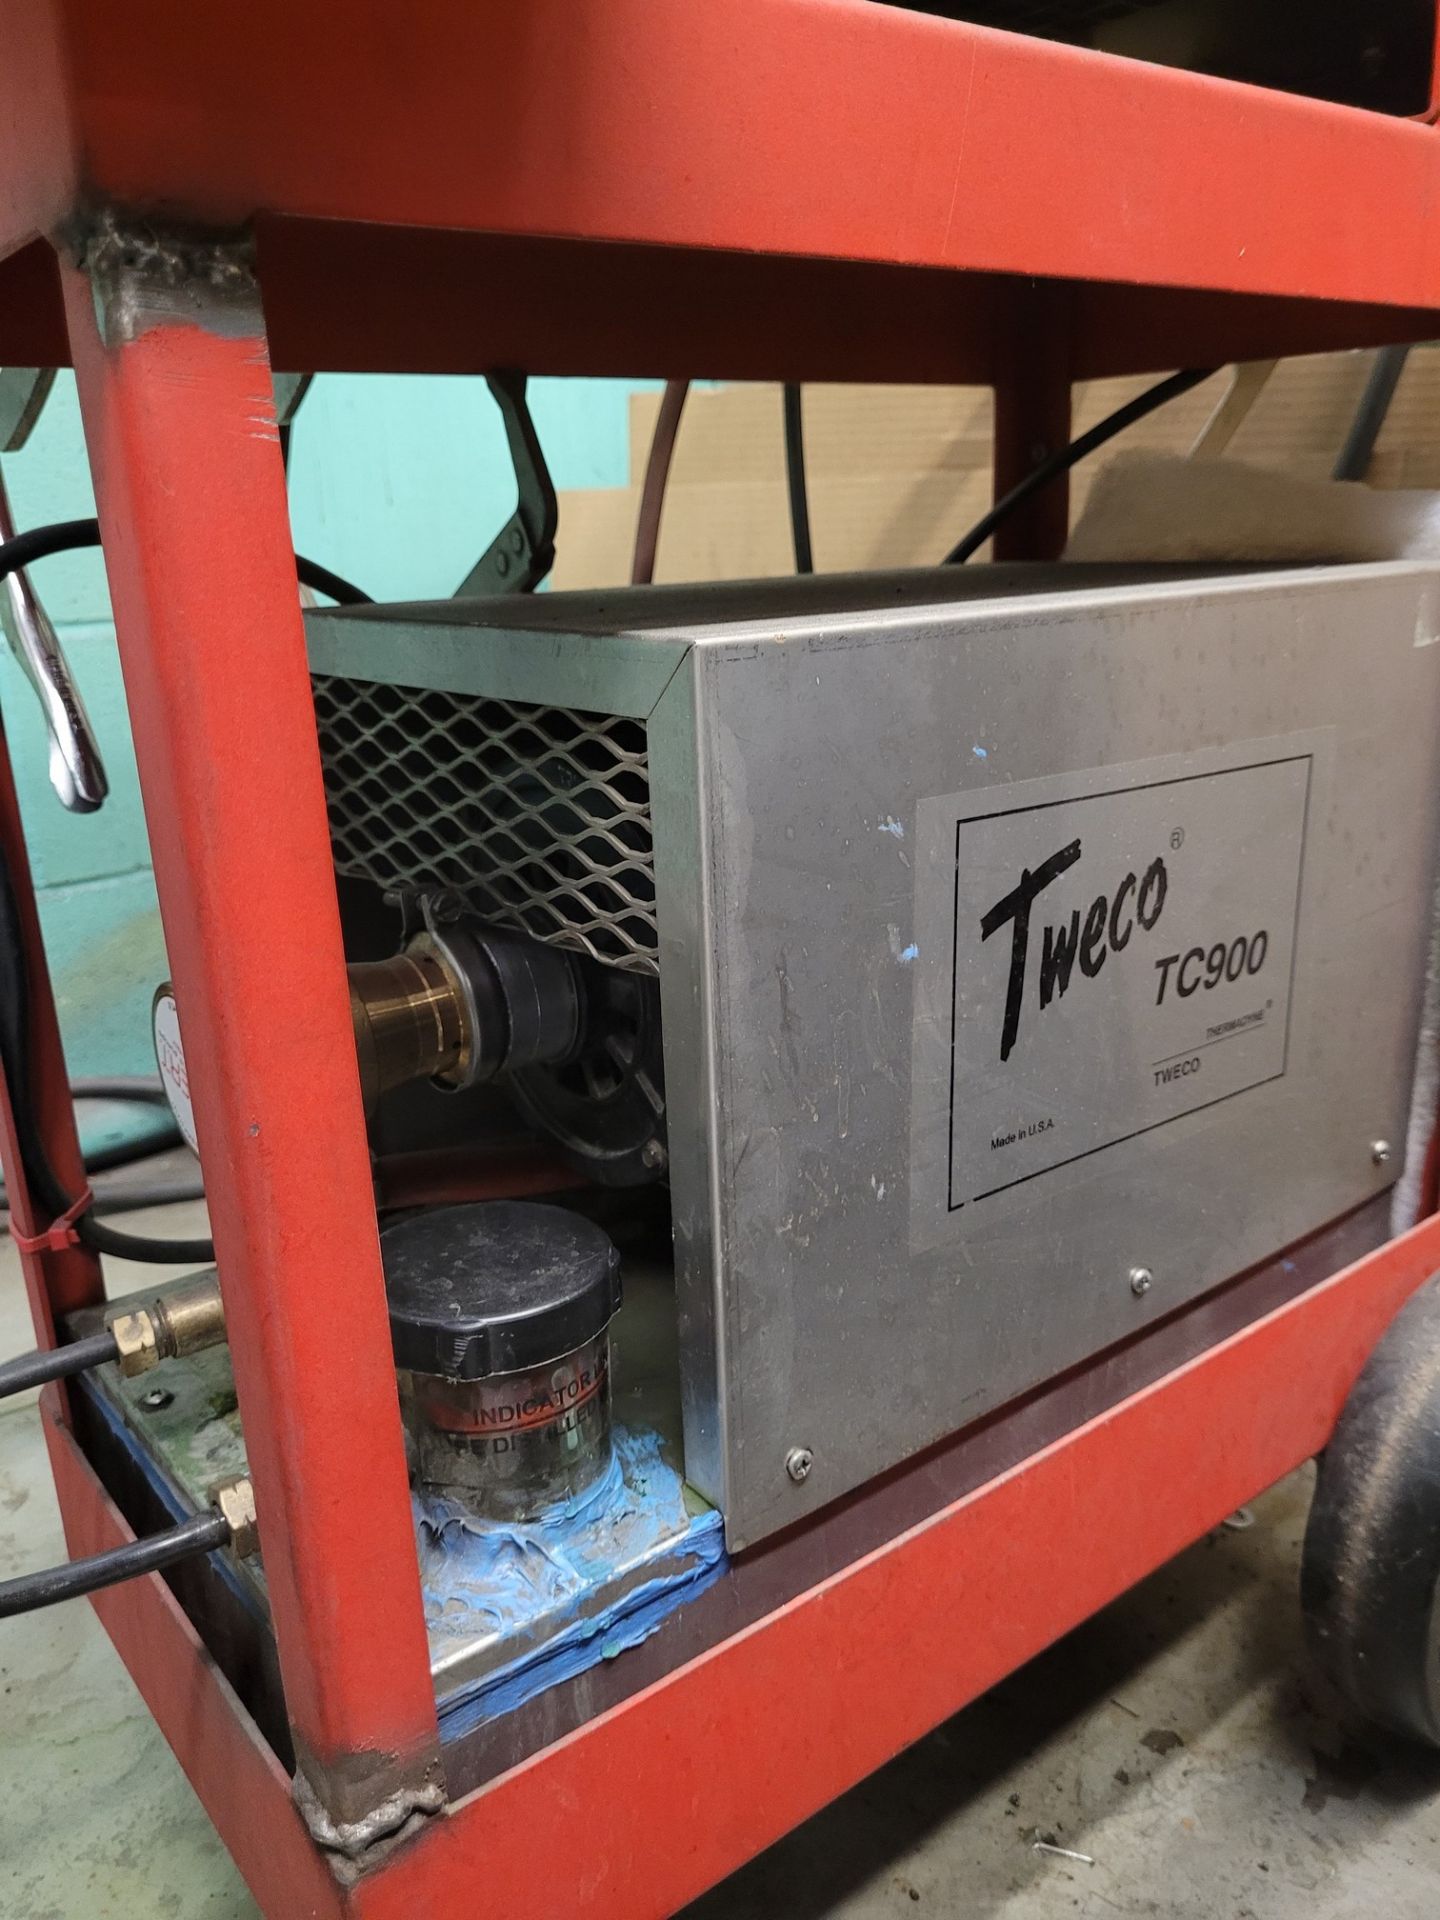 THERMAL ARC 300GTSW ARC WELDER, S/N 000920A188809G W/ TWECO TC900 COOLING UNIT (NO TANKS) - Image 5 of 5